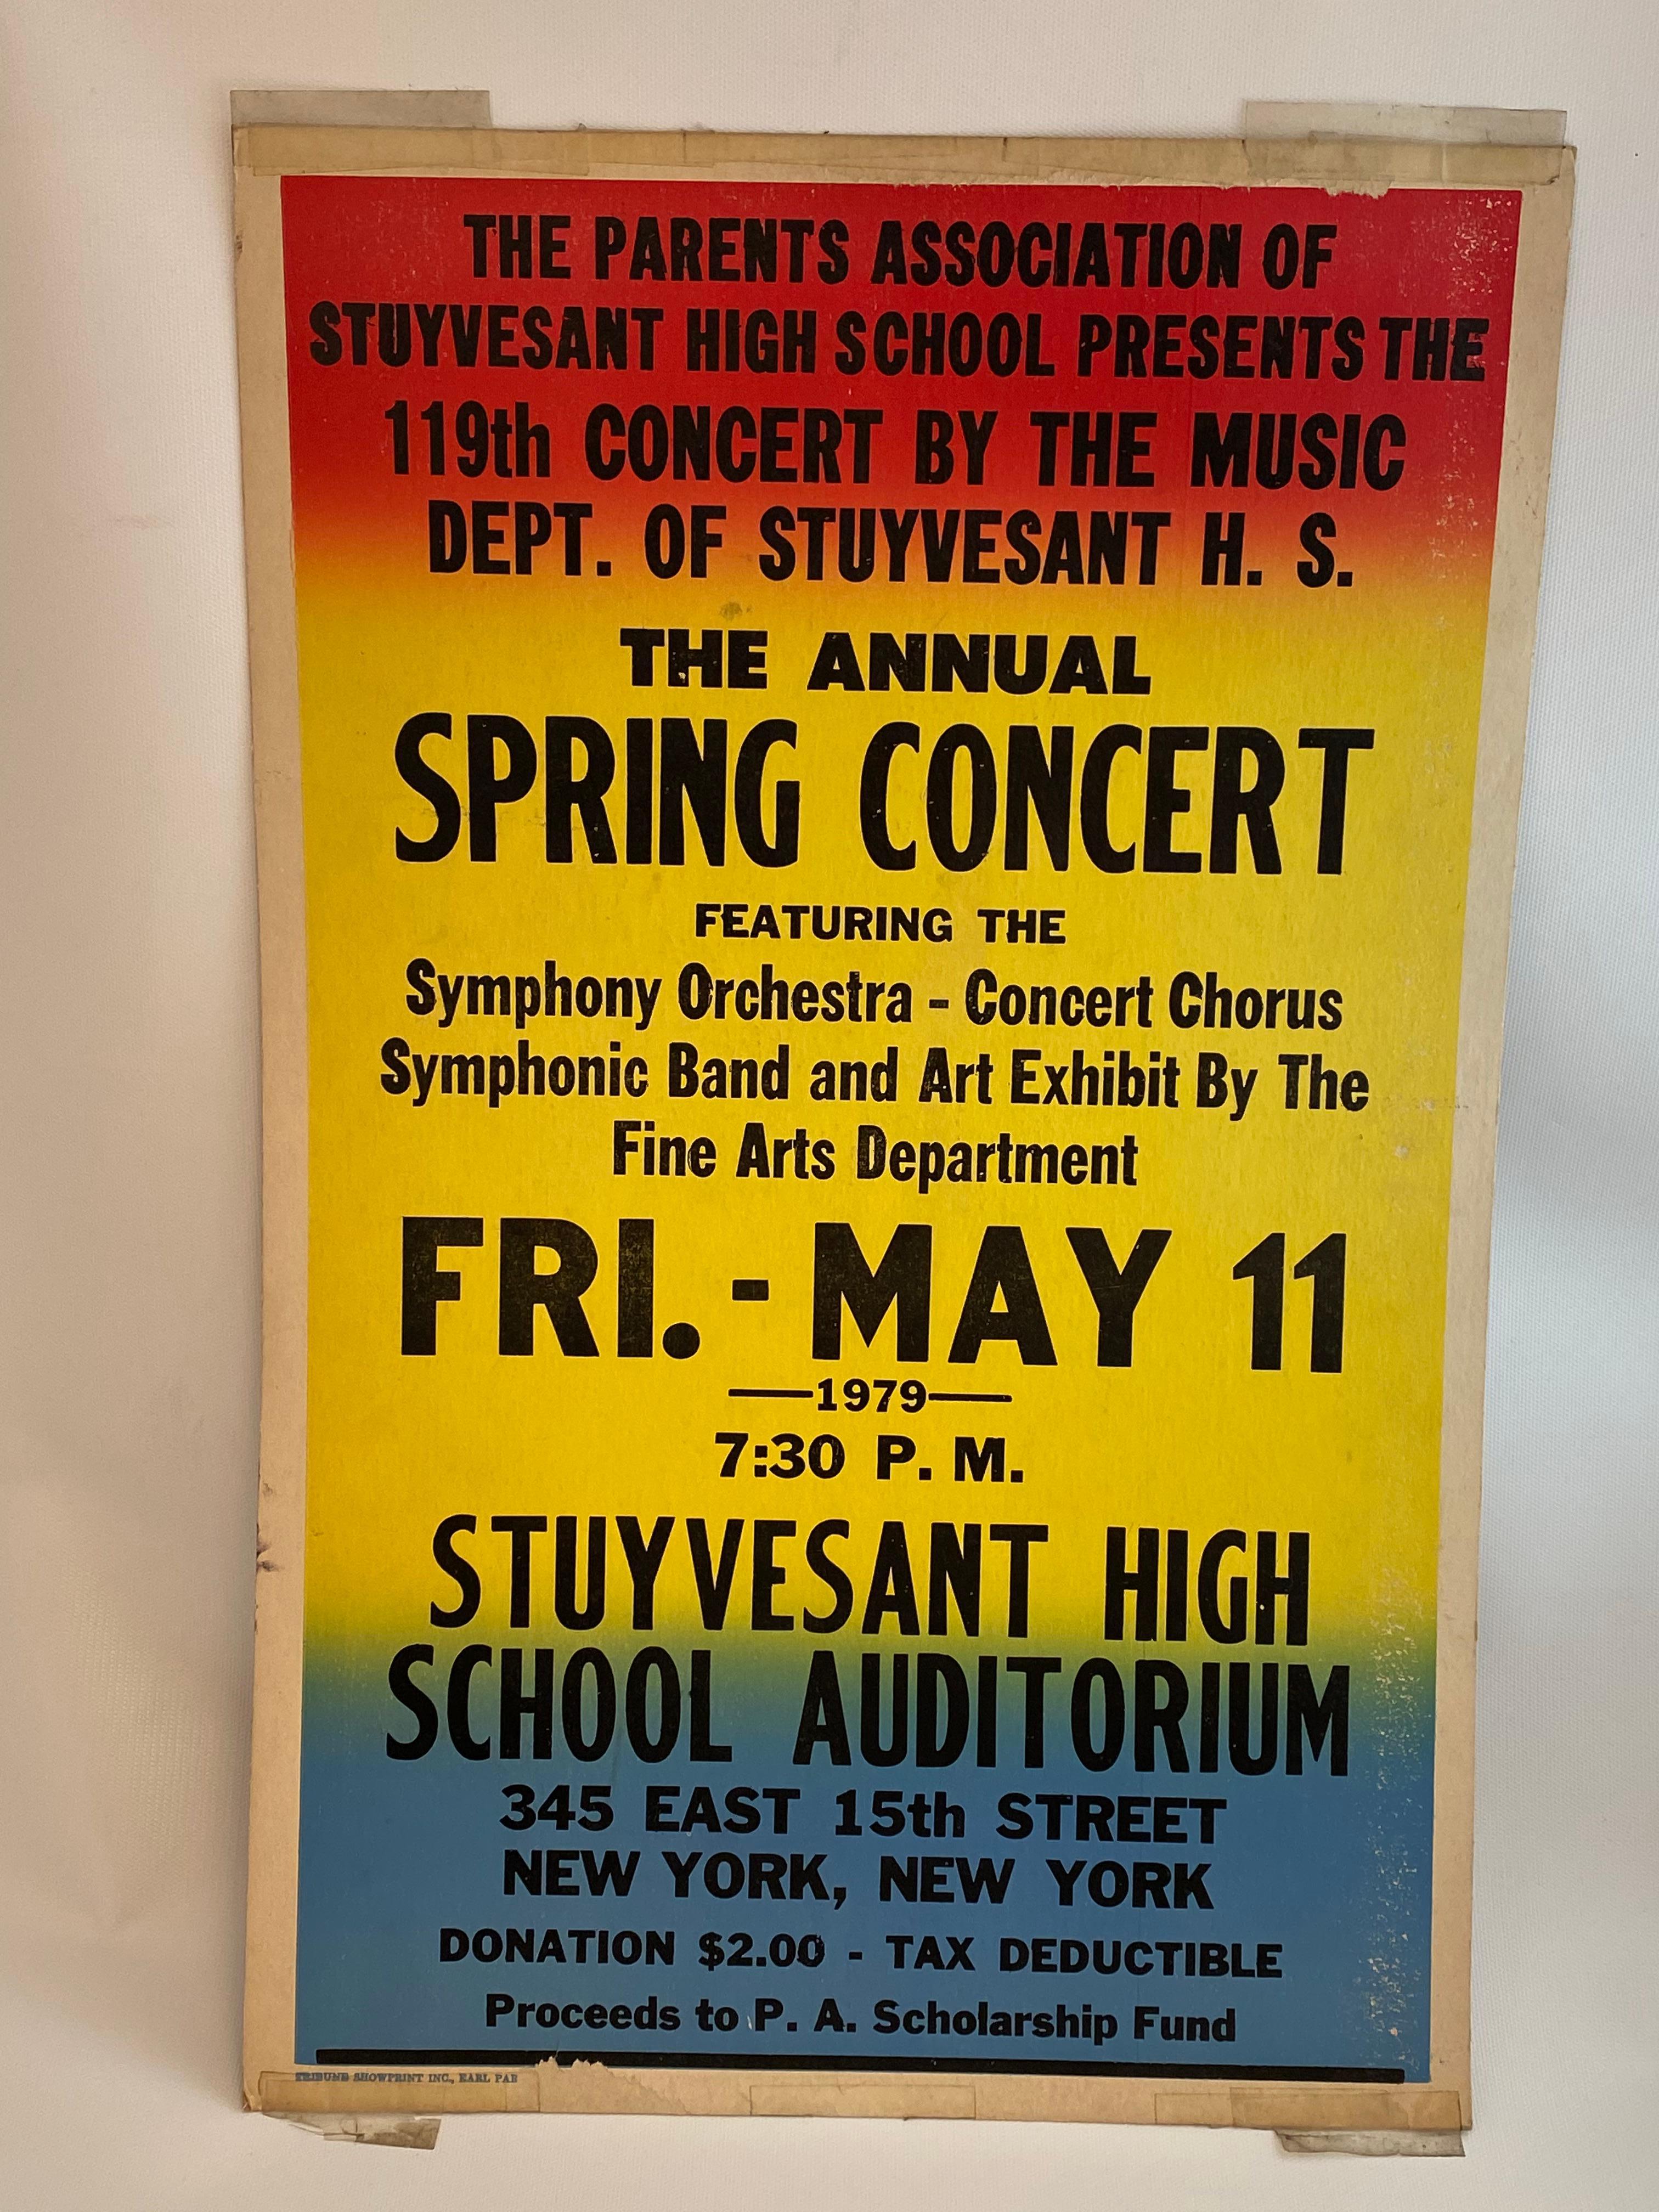 Stuyvesant High School concert poster. Bright rainbow background with black lettering. Circa 1979. The Annual Spring Concert...Good overall condition with wear commensurate with age and use. Soft edges and corners, tape and tape residue fading, but